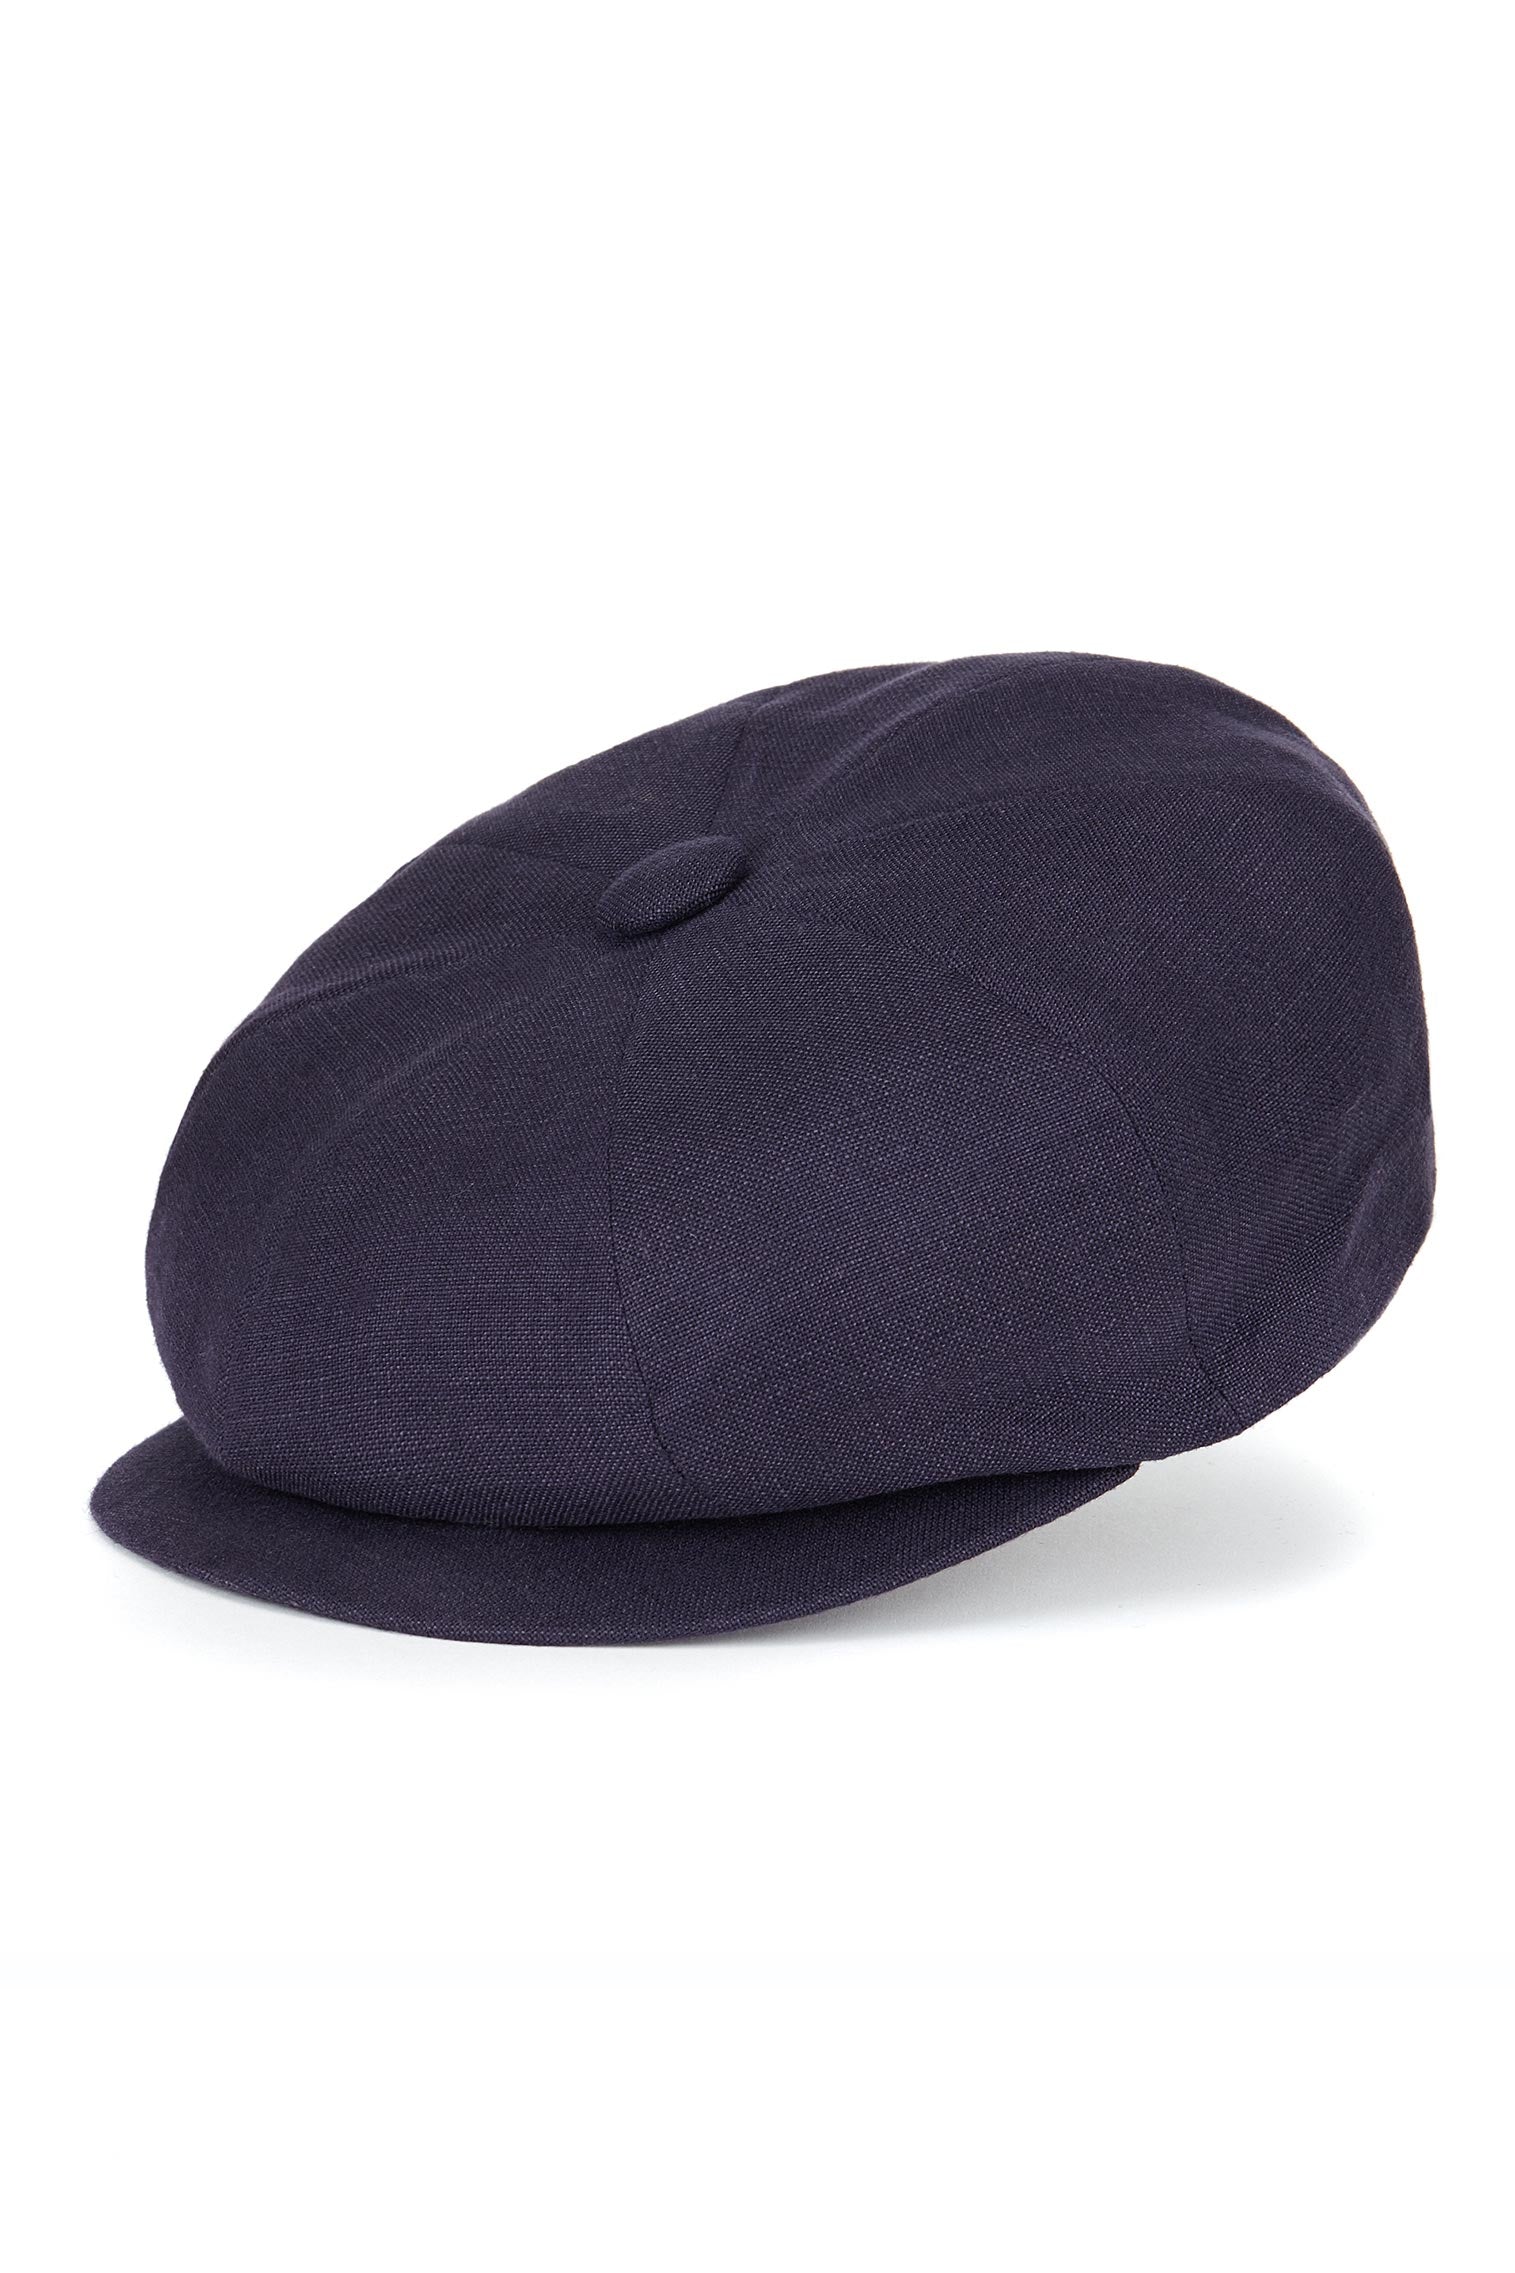 Navy Linen Muirfield Bakerboy Cap - Hats for Oval Face Shapes - Lock & Co. Hatters London UK